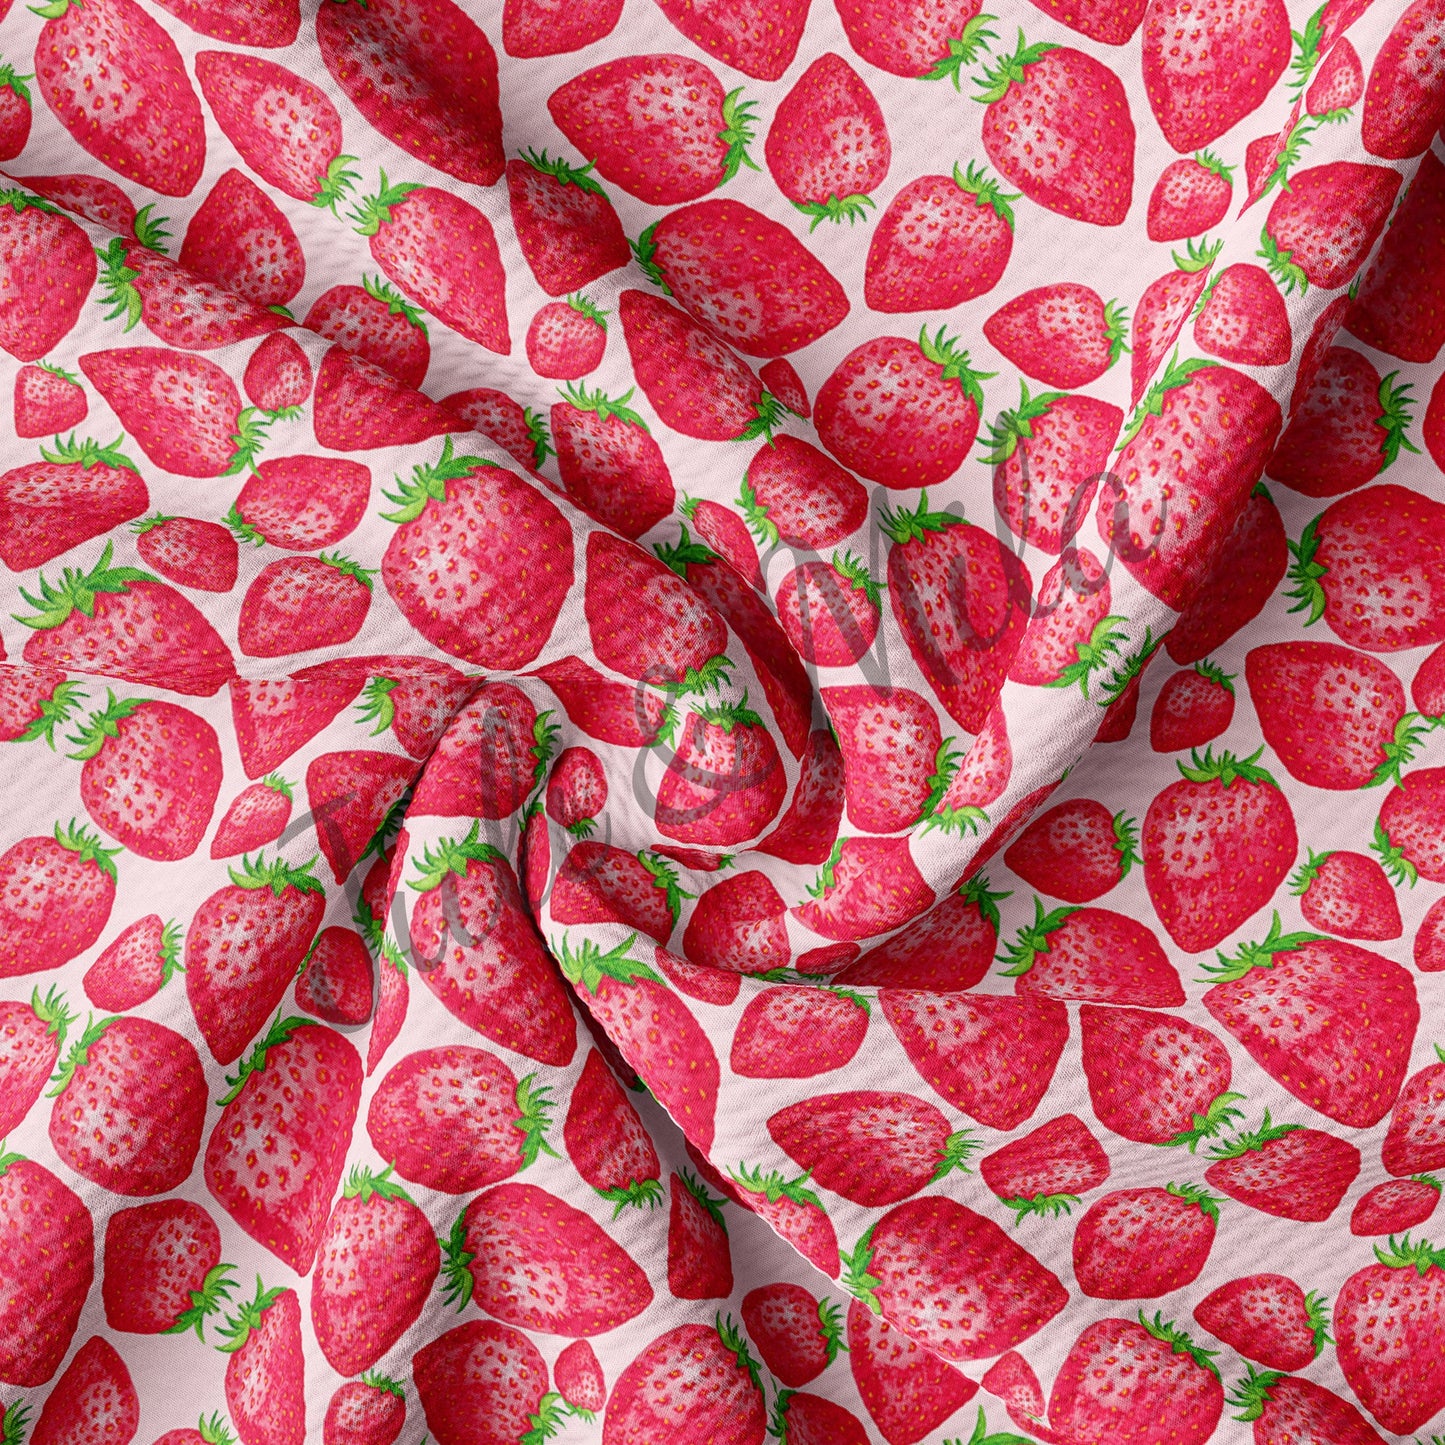 Strawberry Printed Liverpool Bullet Textured Fabric by the yard 4 Way Stretch Solid Strip Thick Liverpool Fabric Strawberry